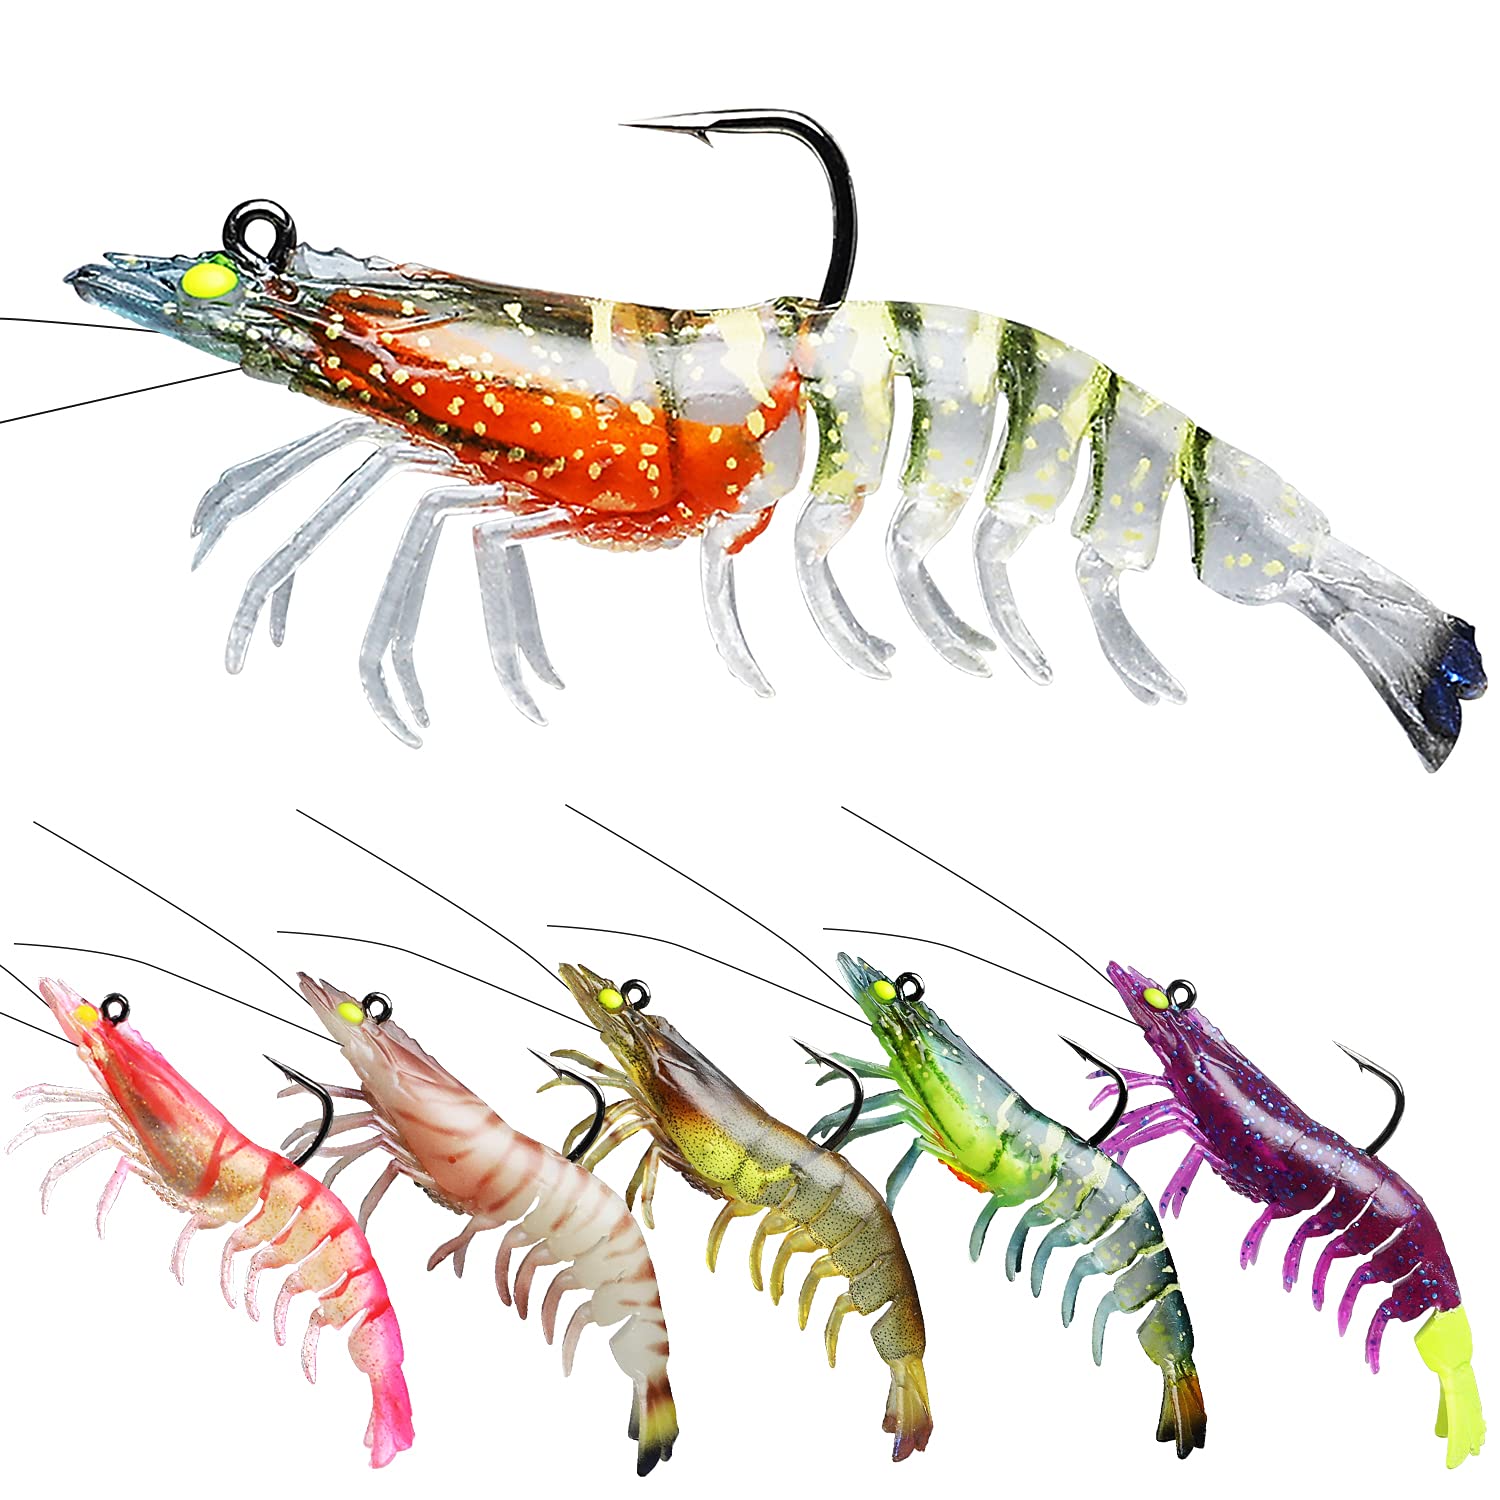 TRUSCEND Pre-Rigged Fishing Lures Premium Shrimp Lure with VMC